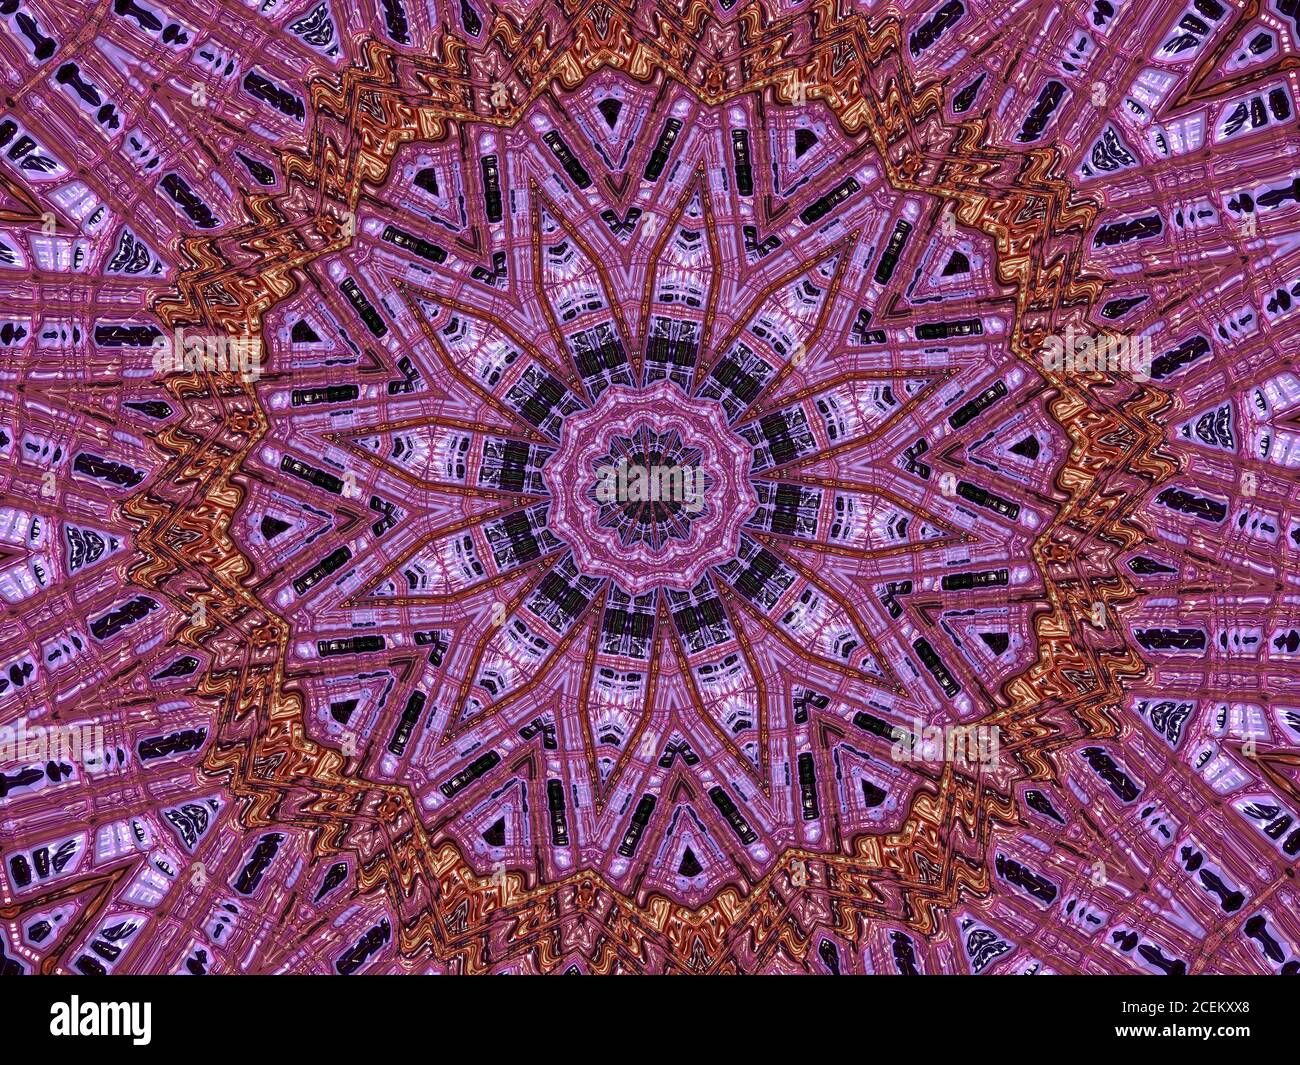 Kaleidoscopic background image in purple and gold Stock Photo